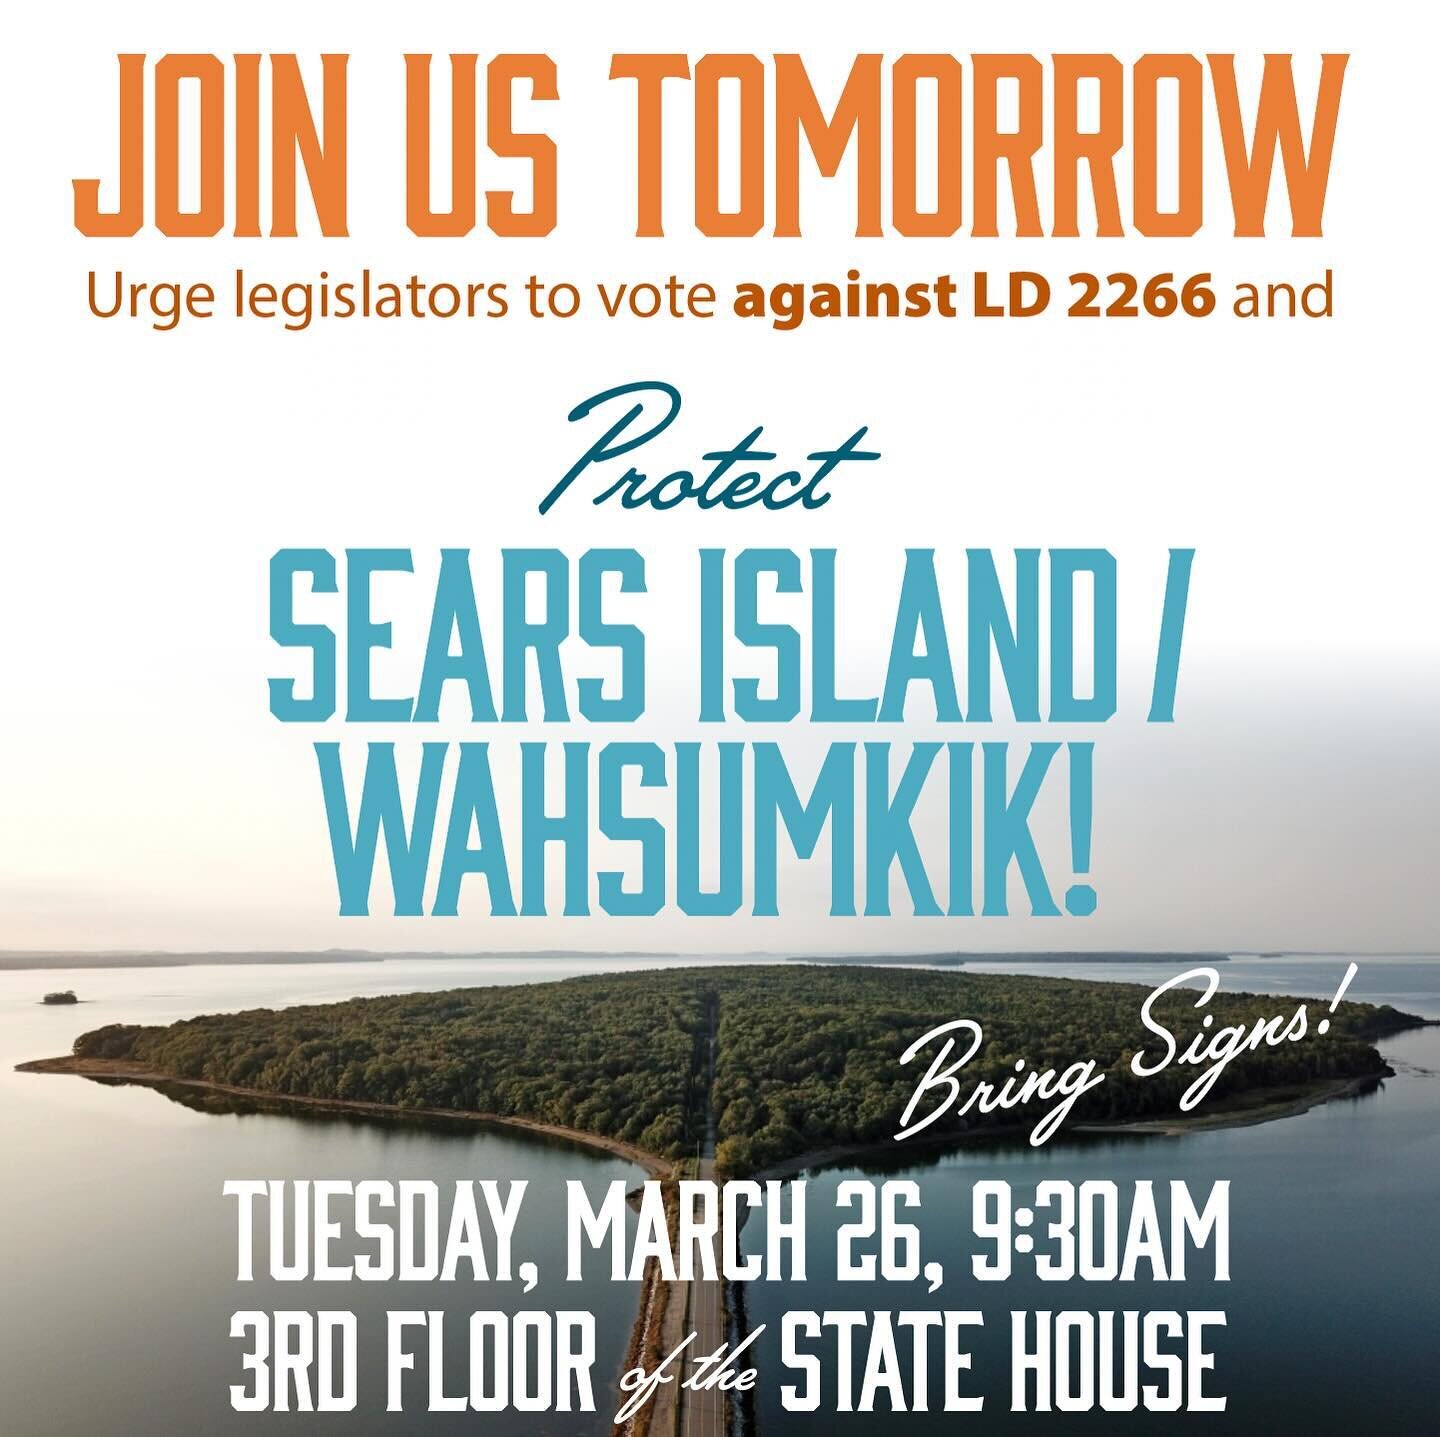 JOIN US TOMORROW! Urge legislators to vote against LD 2266 and protect Sears Island / Wahsumkik Tuesday, March 26 9:30a.m. 3rd floor of the State House. Bring signs! If you can&rsquo;t be there, please call your legislators! The vote could happen any